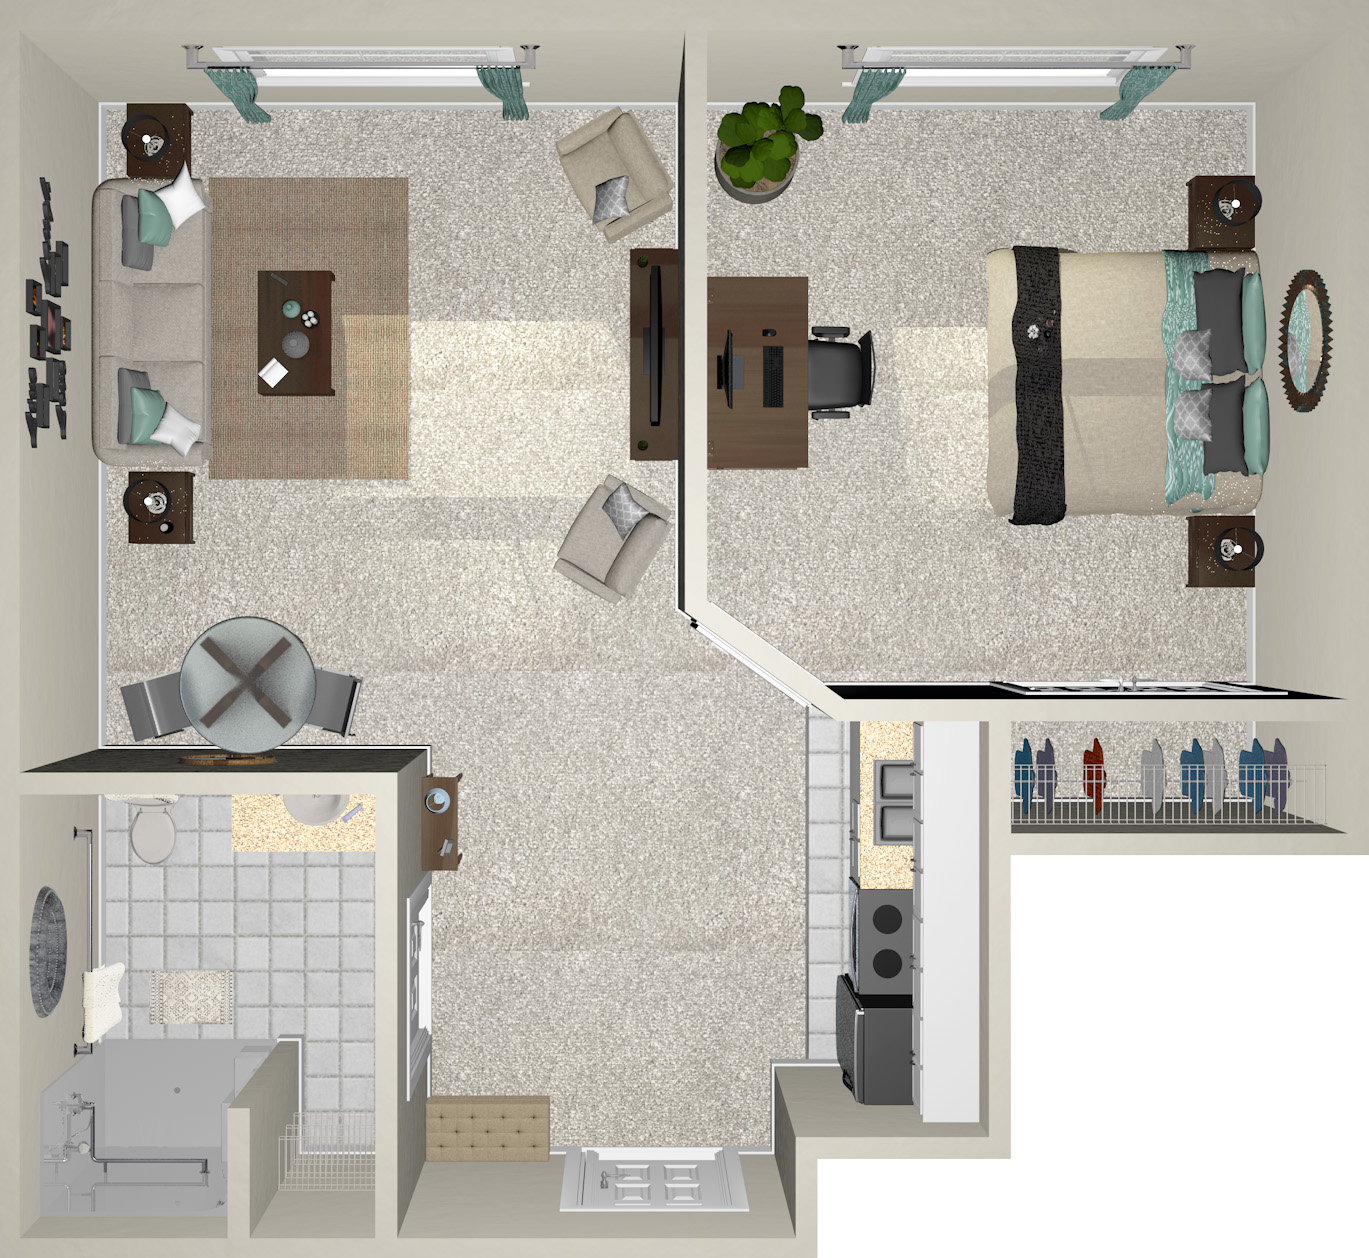 Personal Care One Bedroom - 512 Sq. Ft.